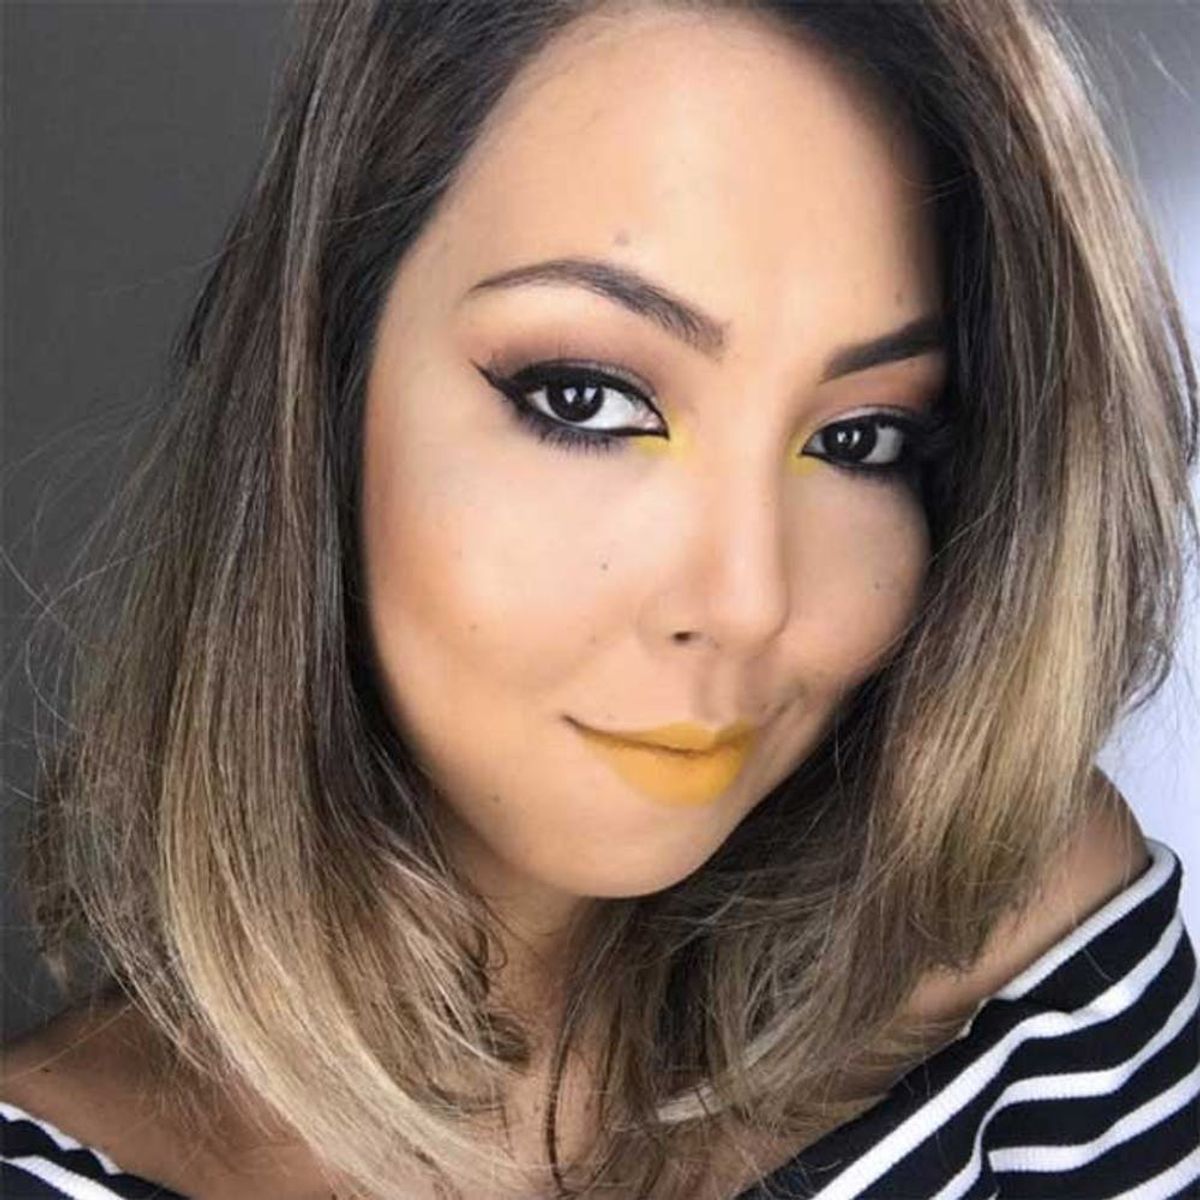 How to Add Yellow Makeup to Your Summer Beauty Routine